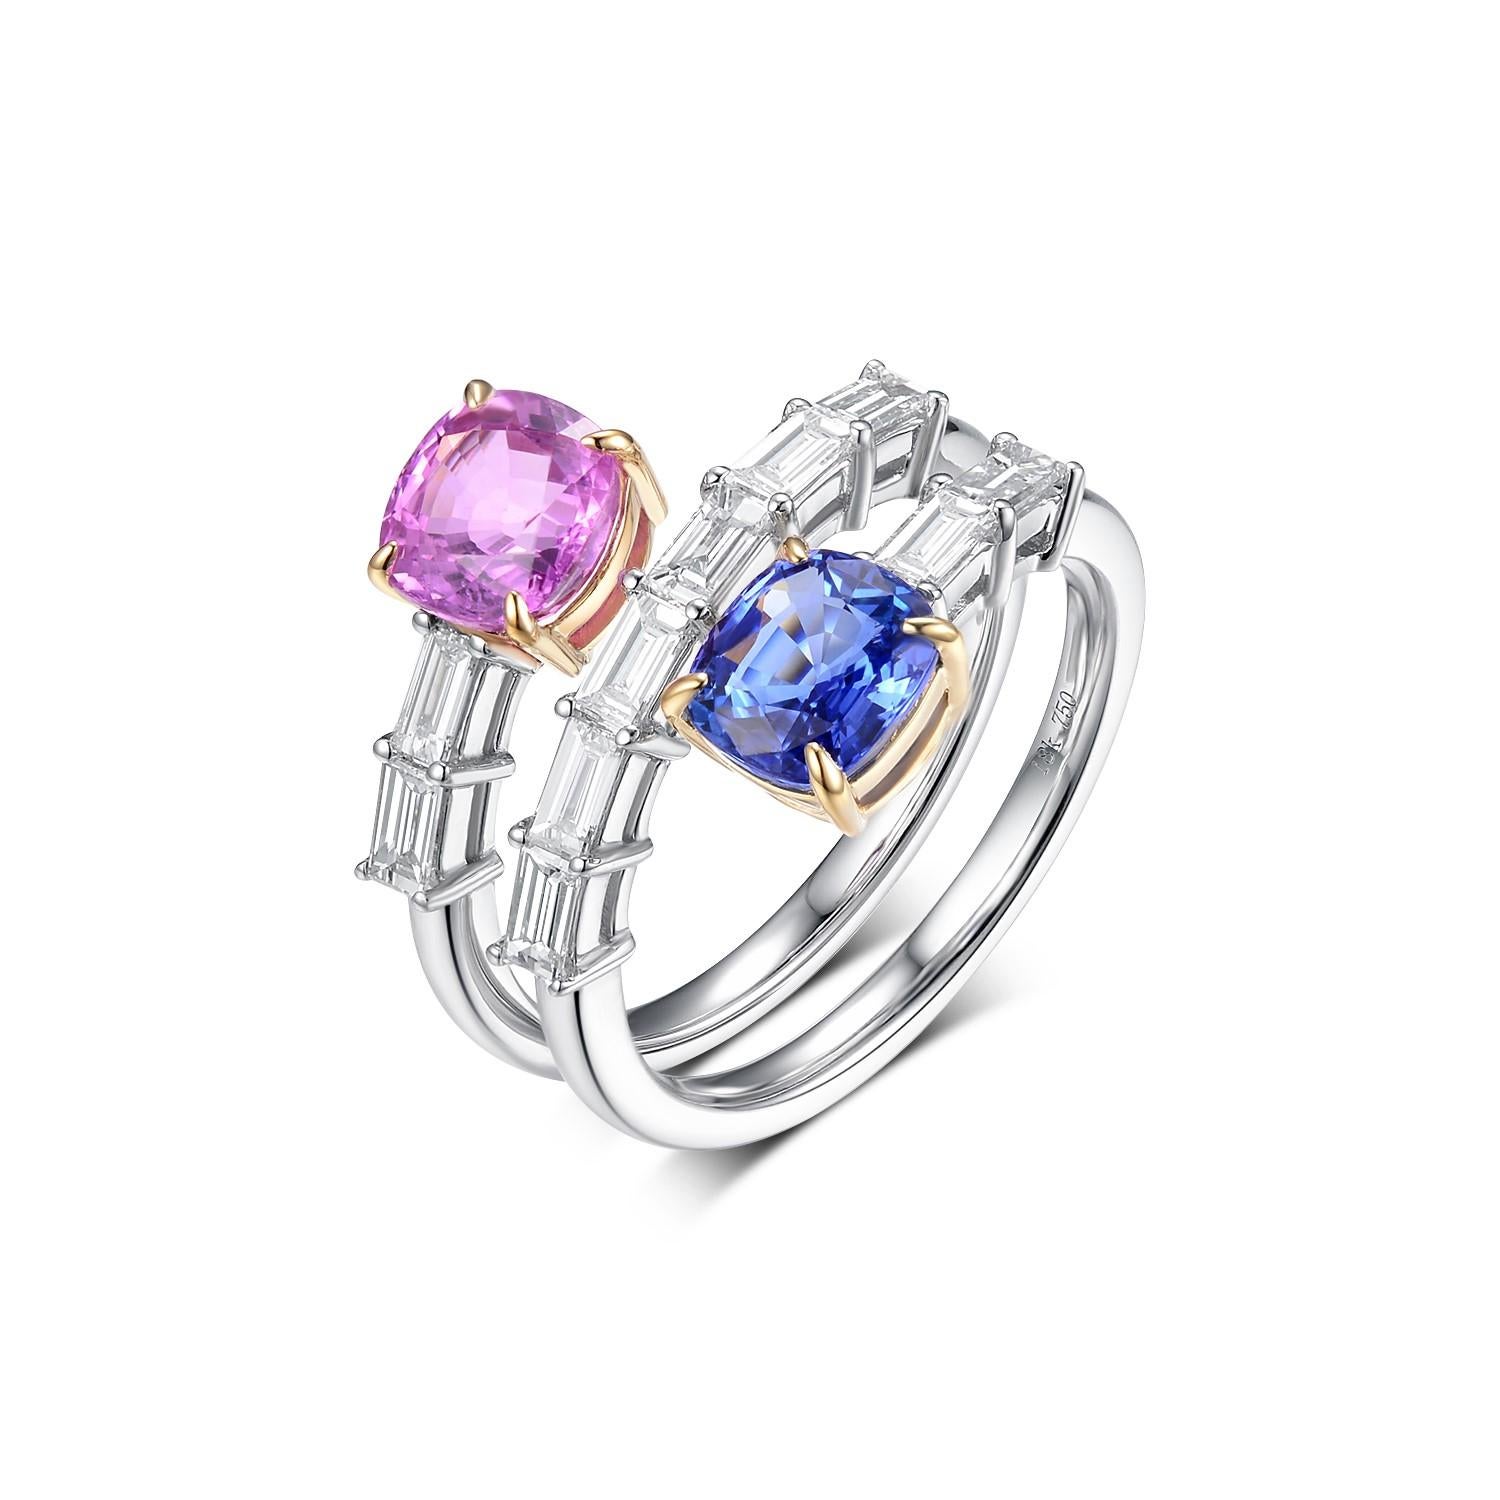 This Blue and Pink Sapphire Toi Et Moi Diamond Ring is a captivating representation of romance, sophistication, and harmony. Designed with exquisite craftsmanship in 18 Karat Yellow and White Gold, the ring celebrates a poetic fusion of two vibrant